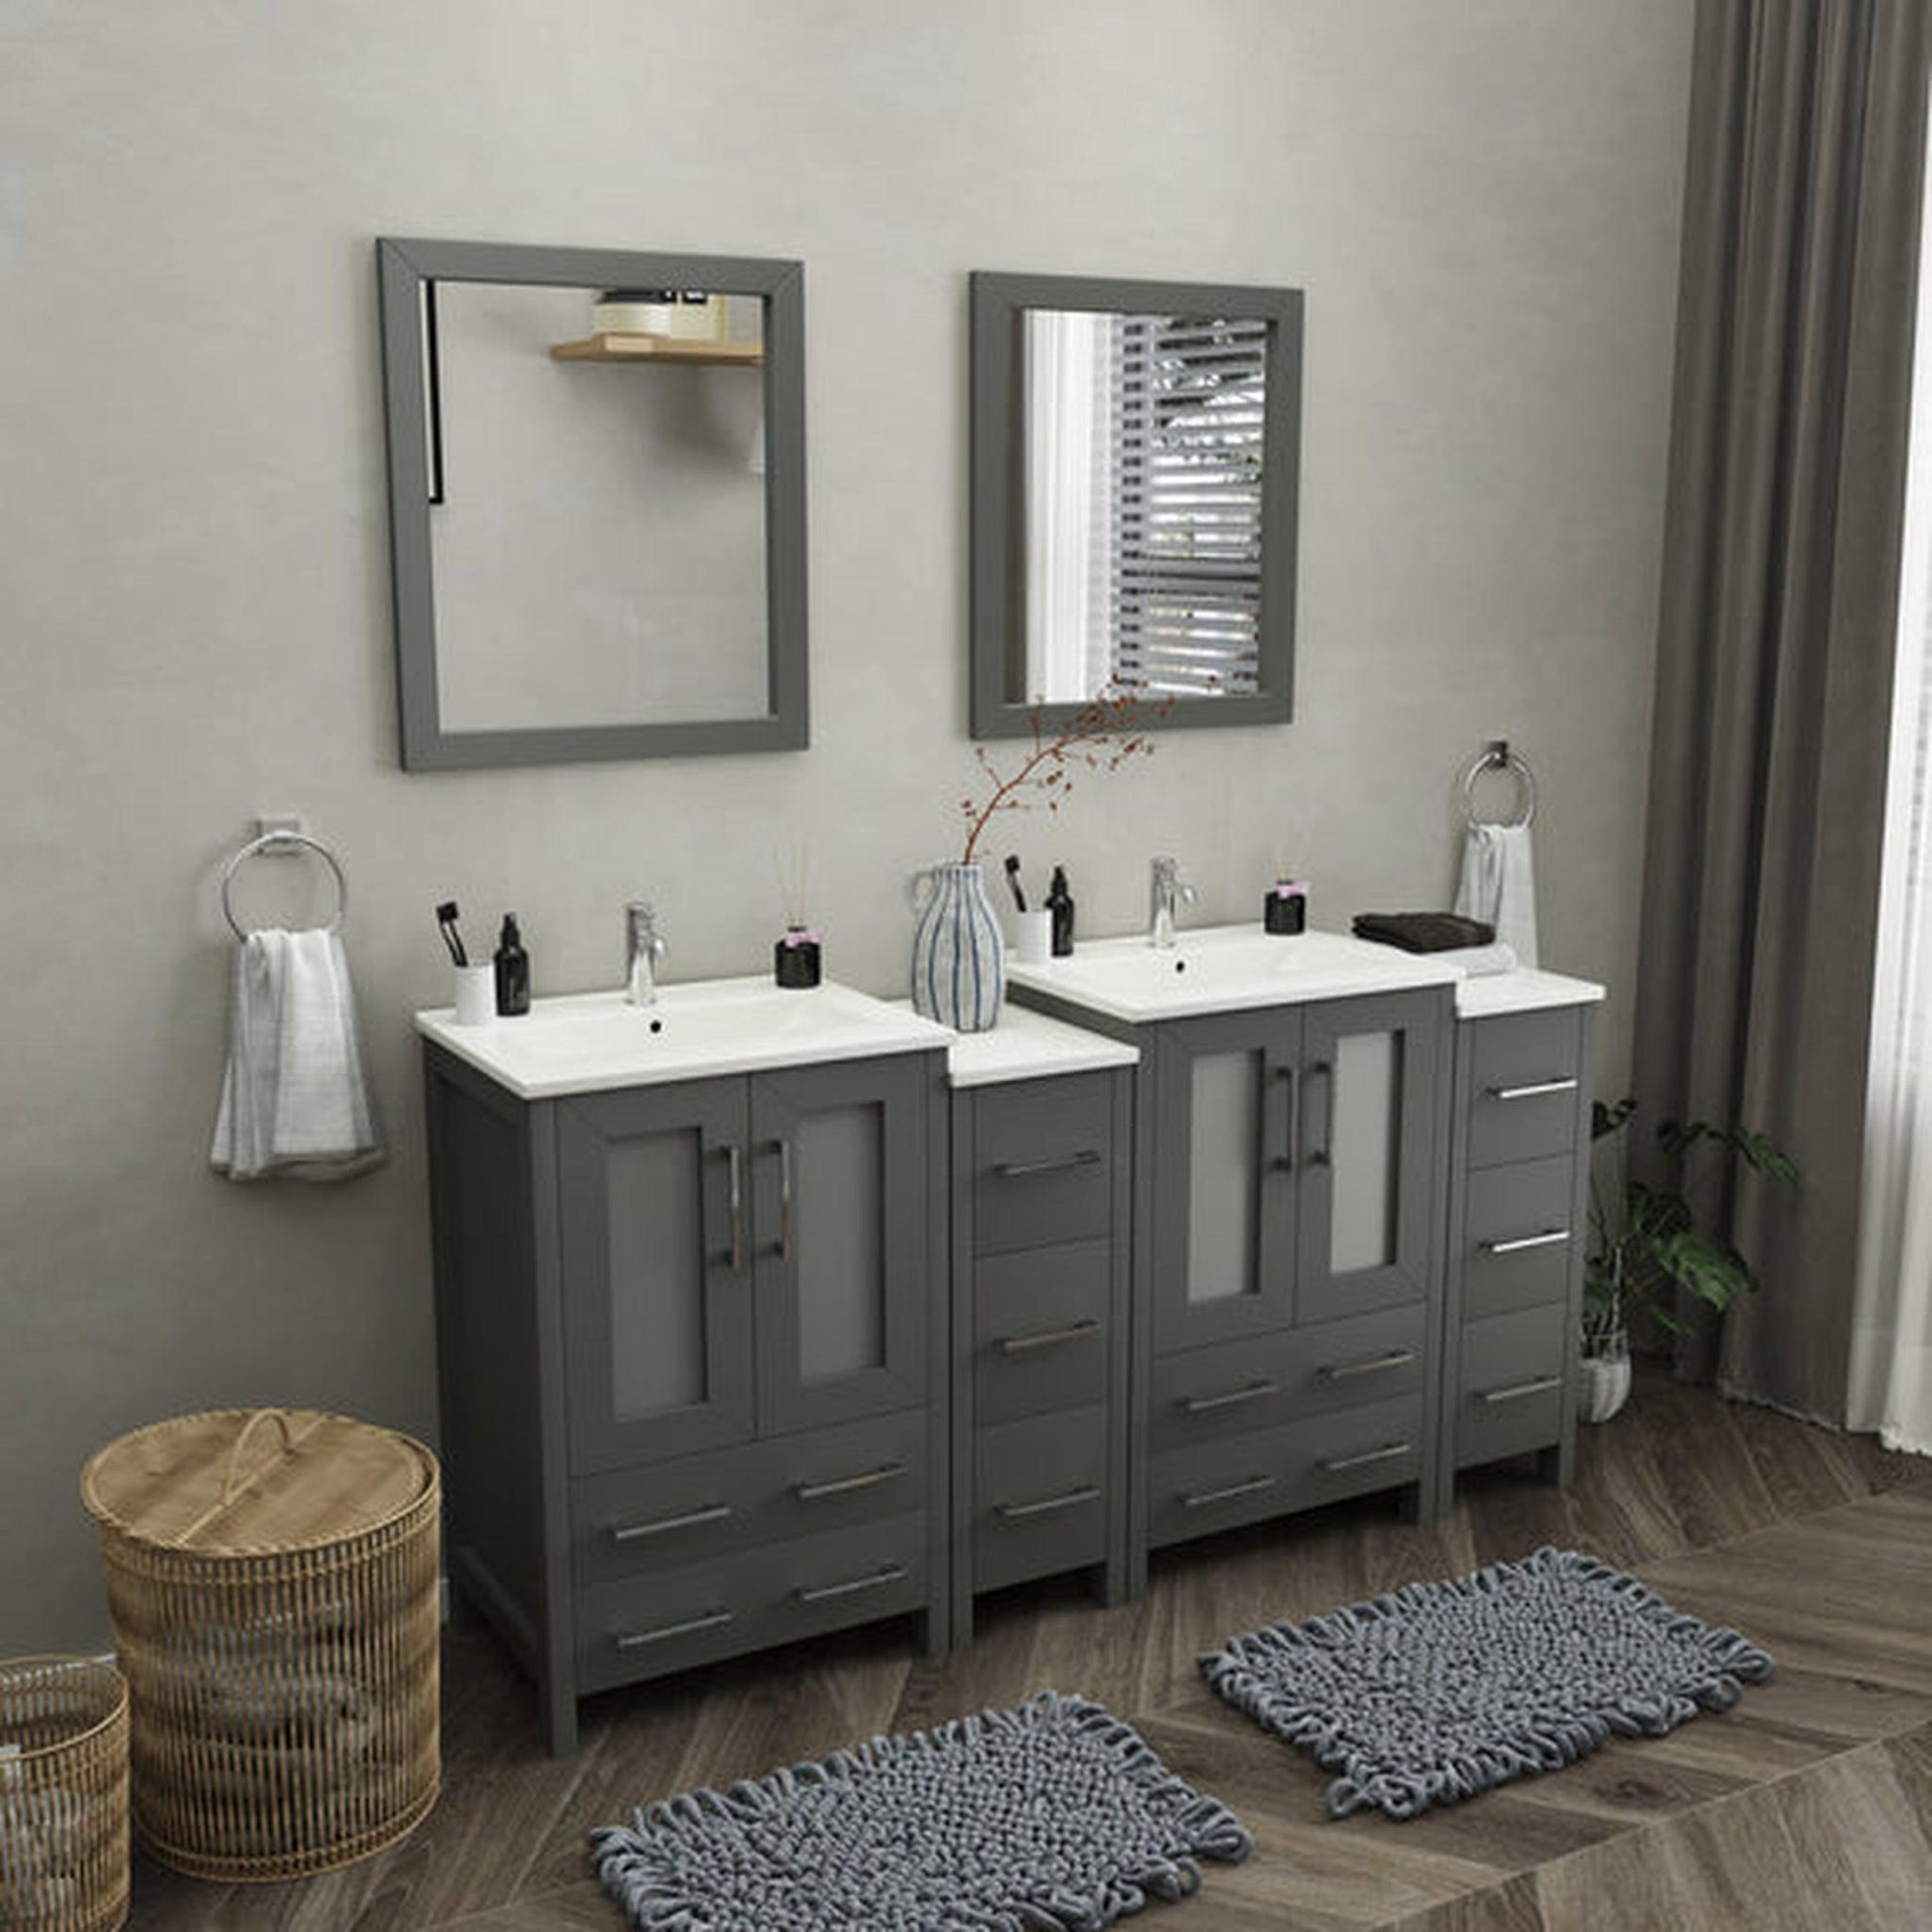 Vanity Art Brescia 72" Double Gray Freestanding Vanity Set With Integrated Ceramic Sink, 2 Side Cabinets and 2 Mirrors